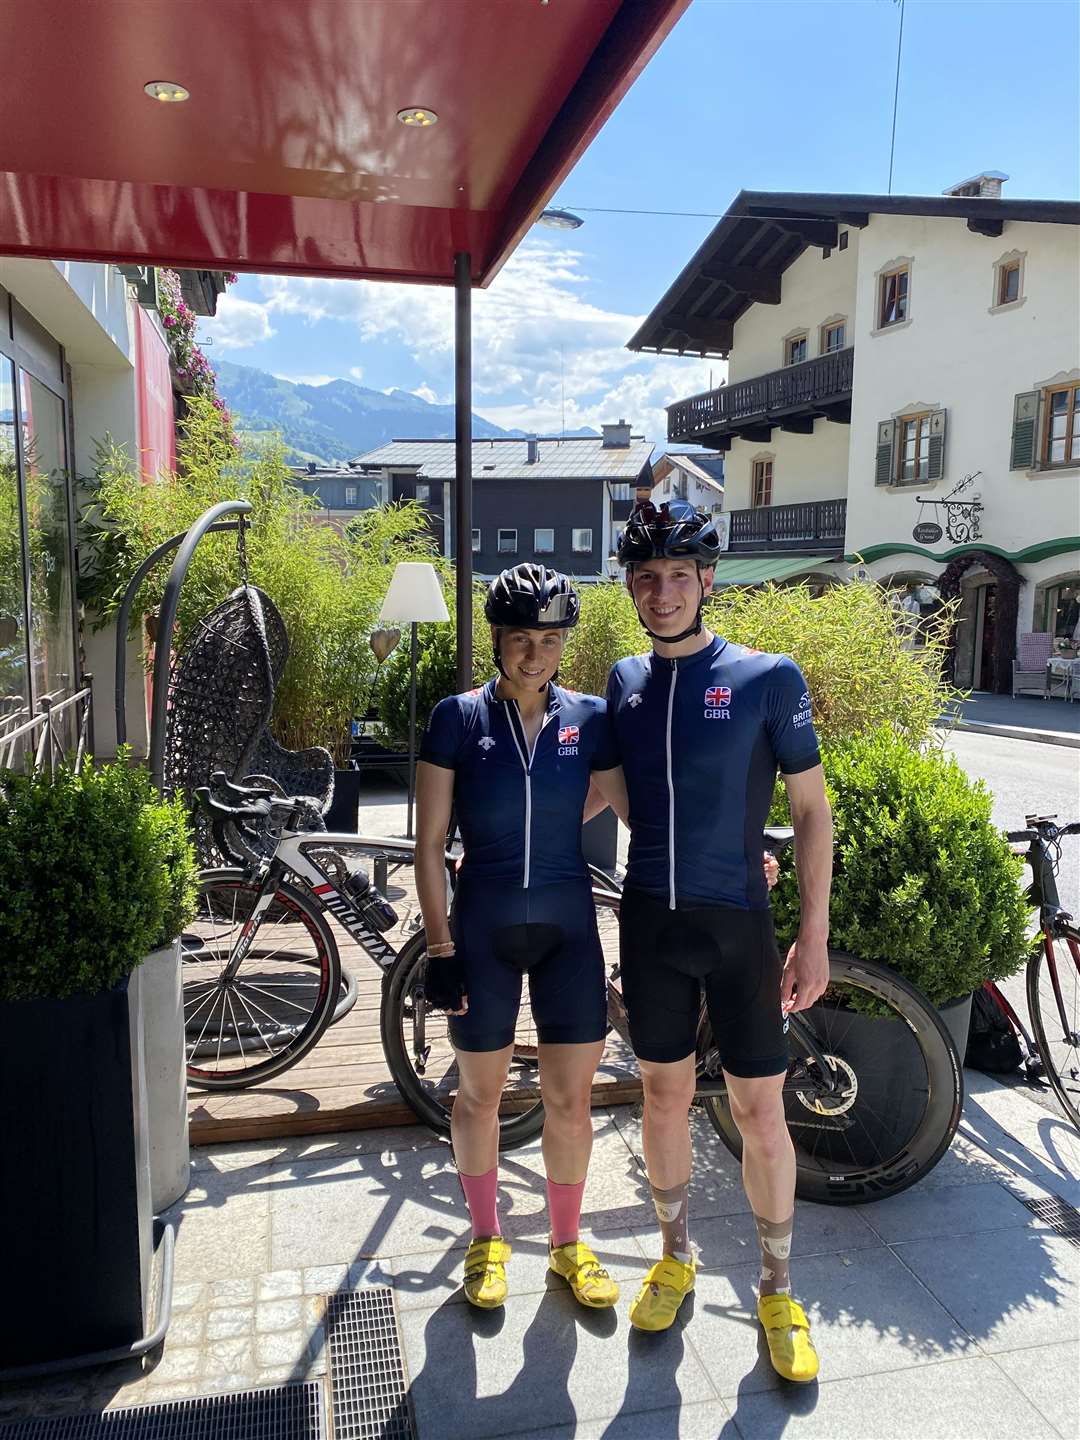 All kitted out in Kitzbuhel for the Euro Championships are Sophia Green and Cameron Main.